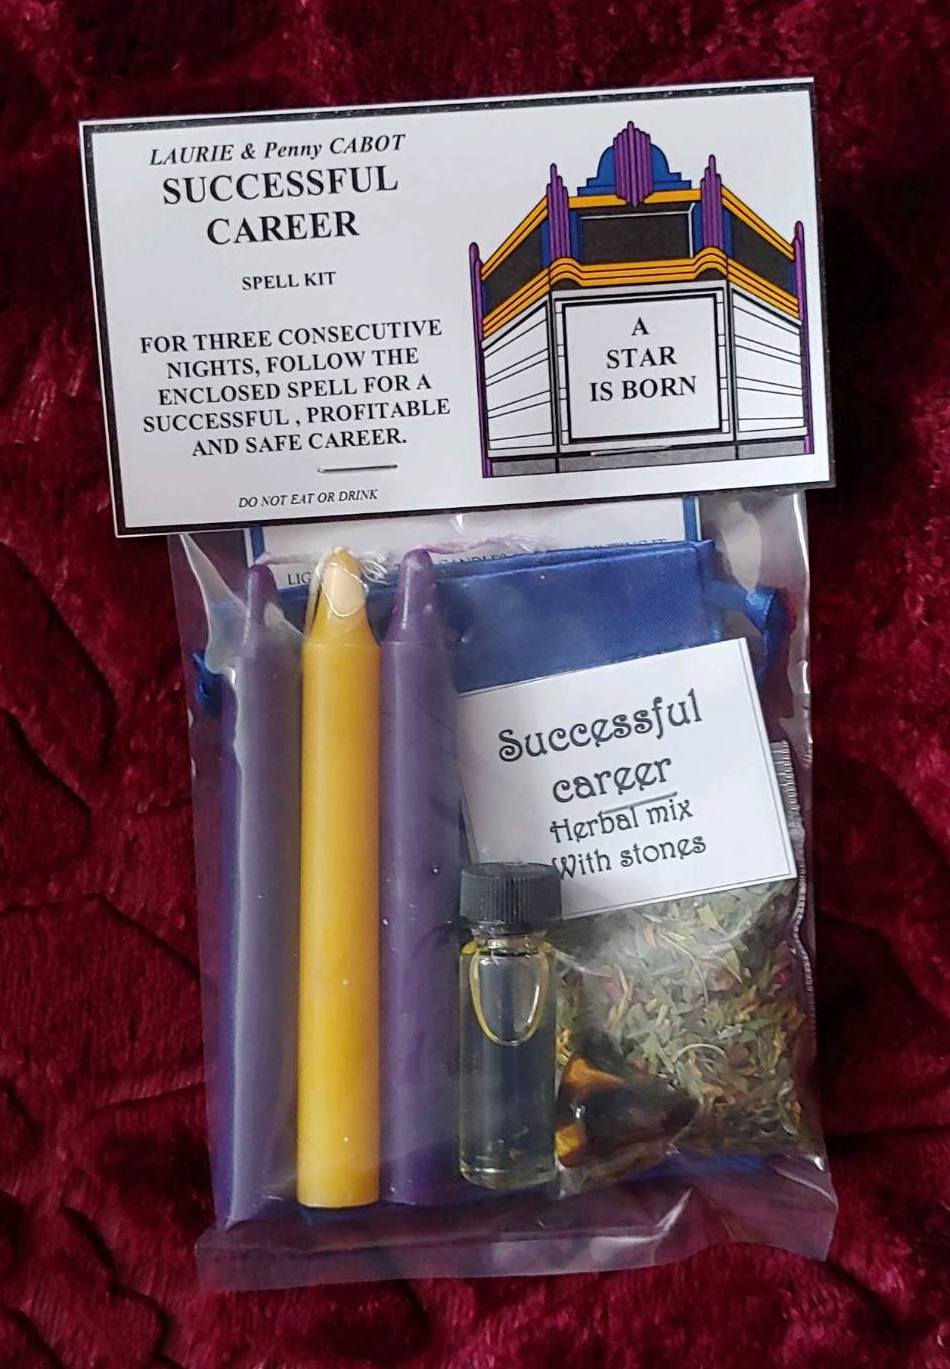 Successful Career Spell Kit by Laurie & Penny Cabot - Click Image to Close